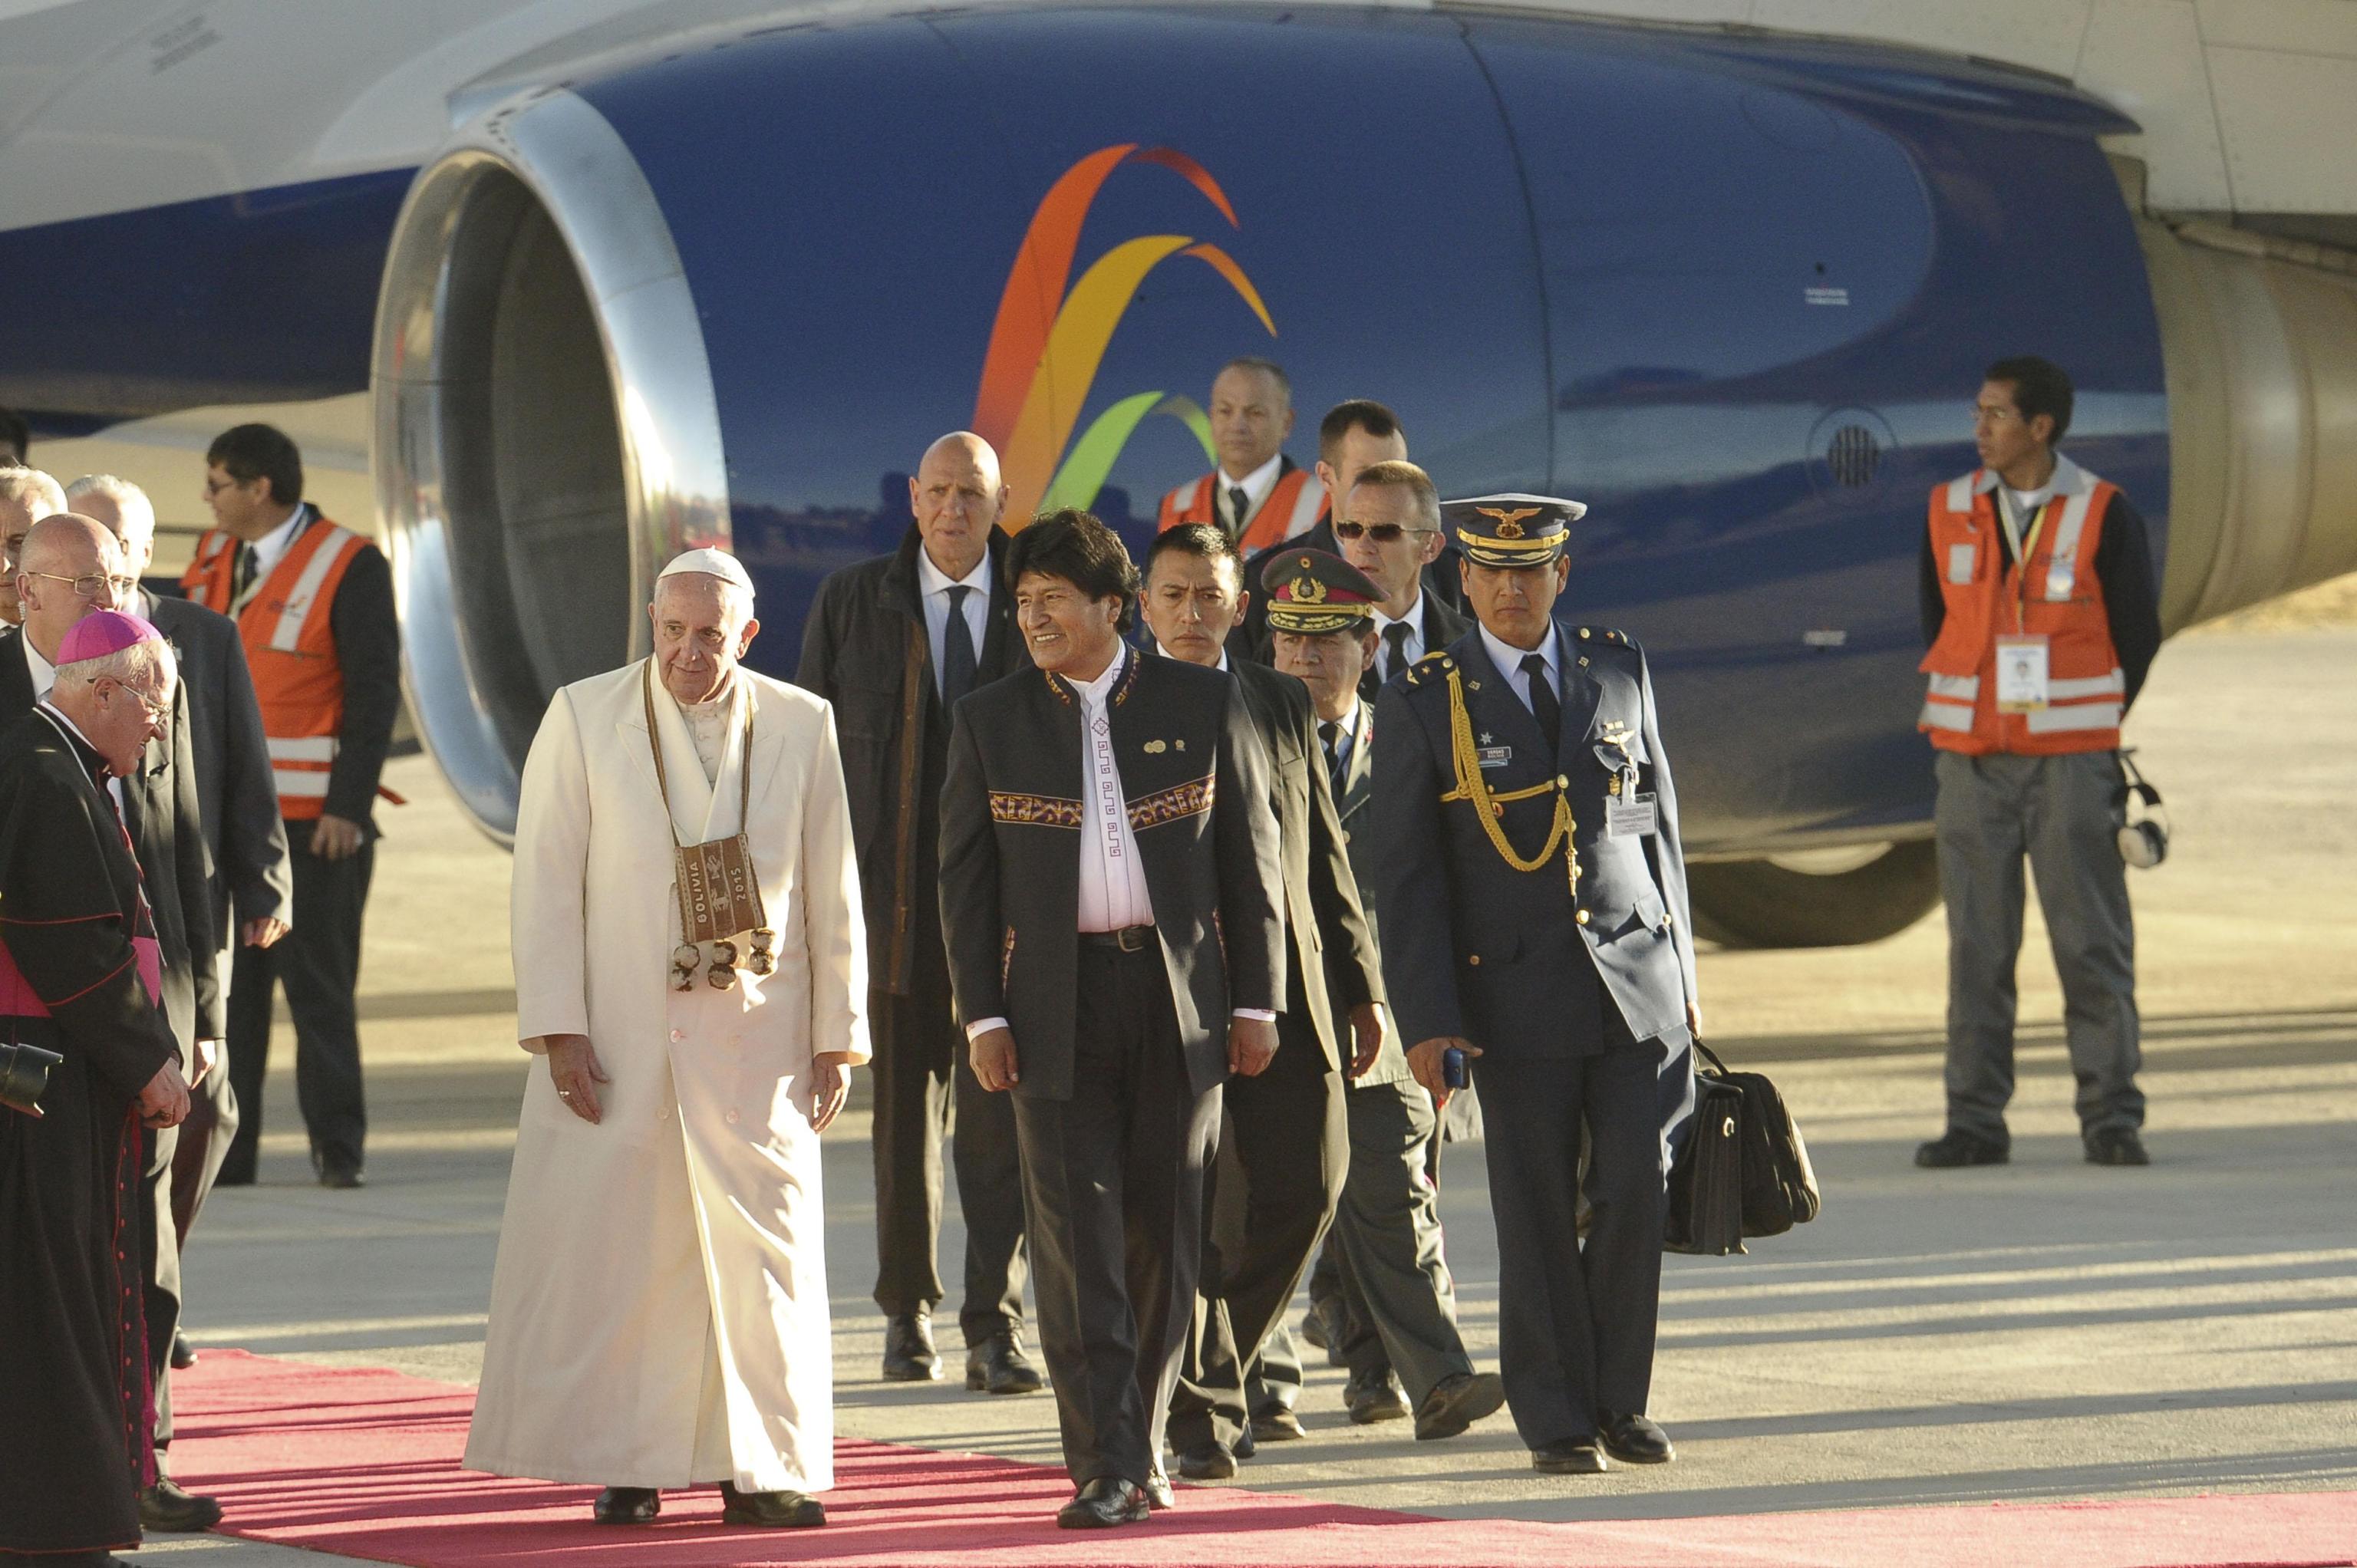 Pope Francis being welcomed by Bolivian President Evo Morales at his arrival at the International Airport of El Alto/La Paz